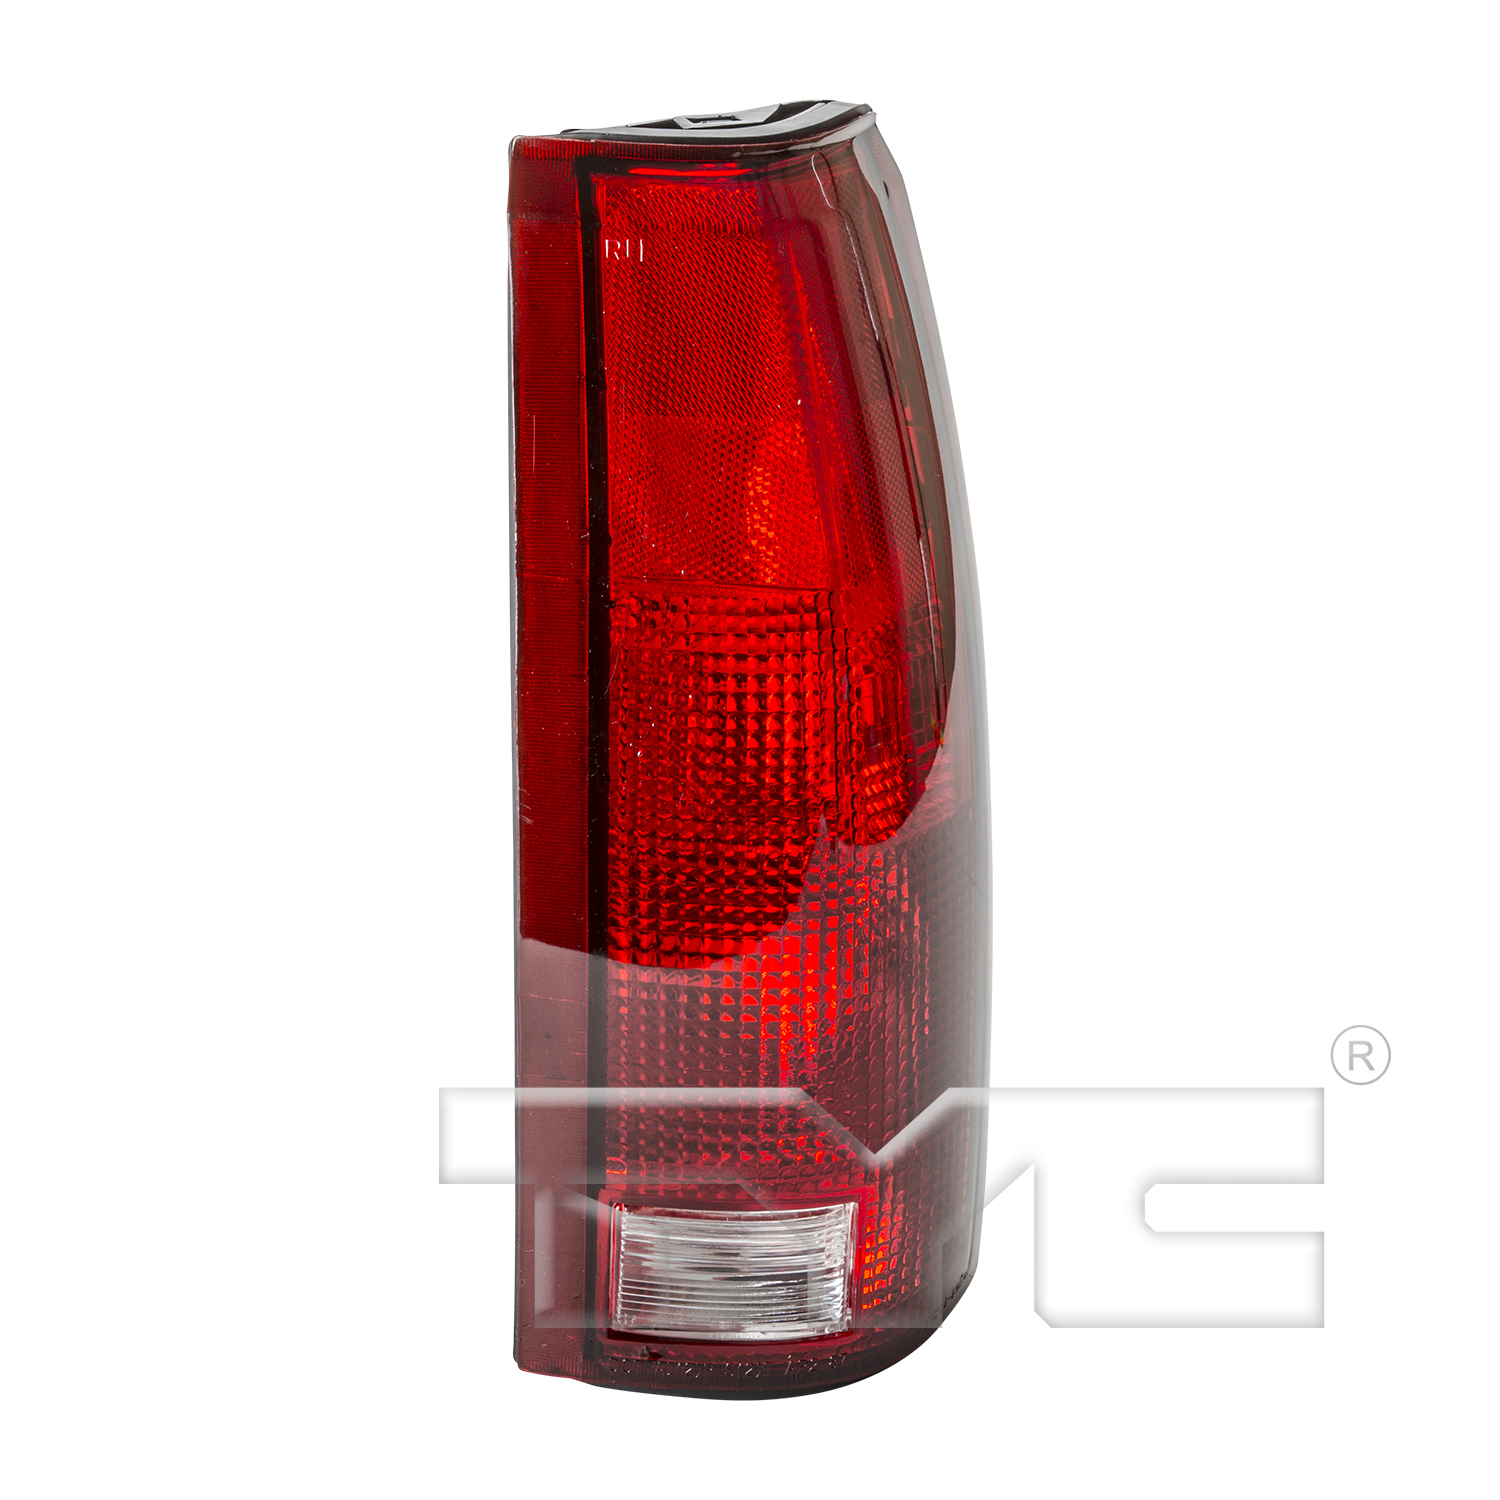 Aftermarket TAILLIGHTS for GMC - C2500, C2500,88-00,RT Taillamp lens